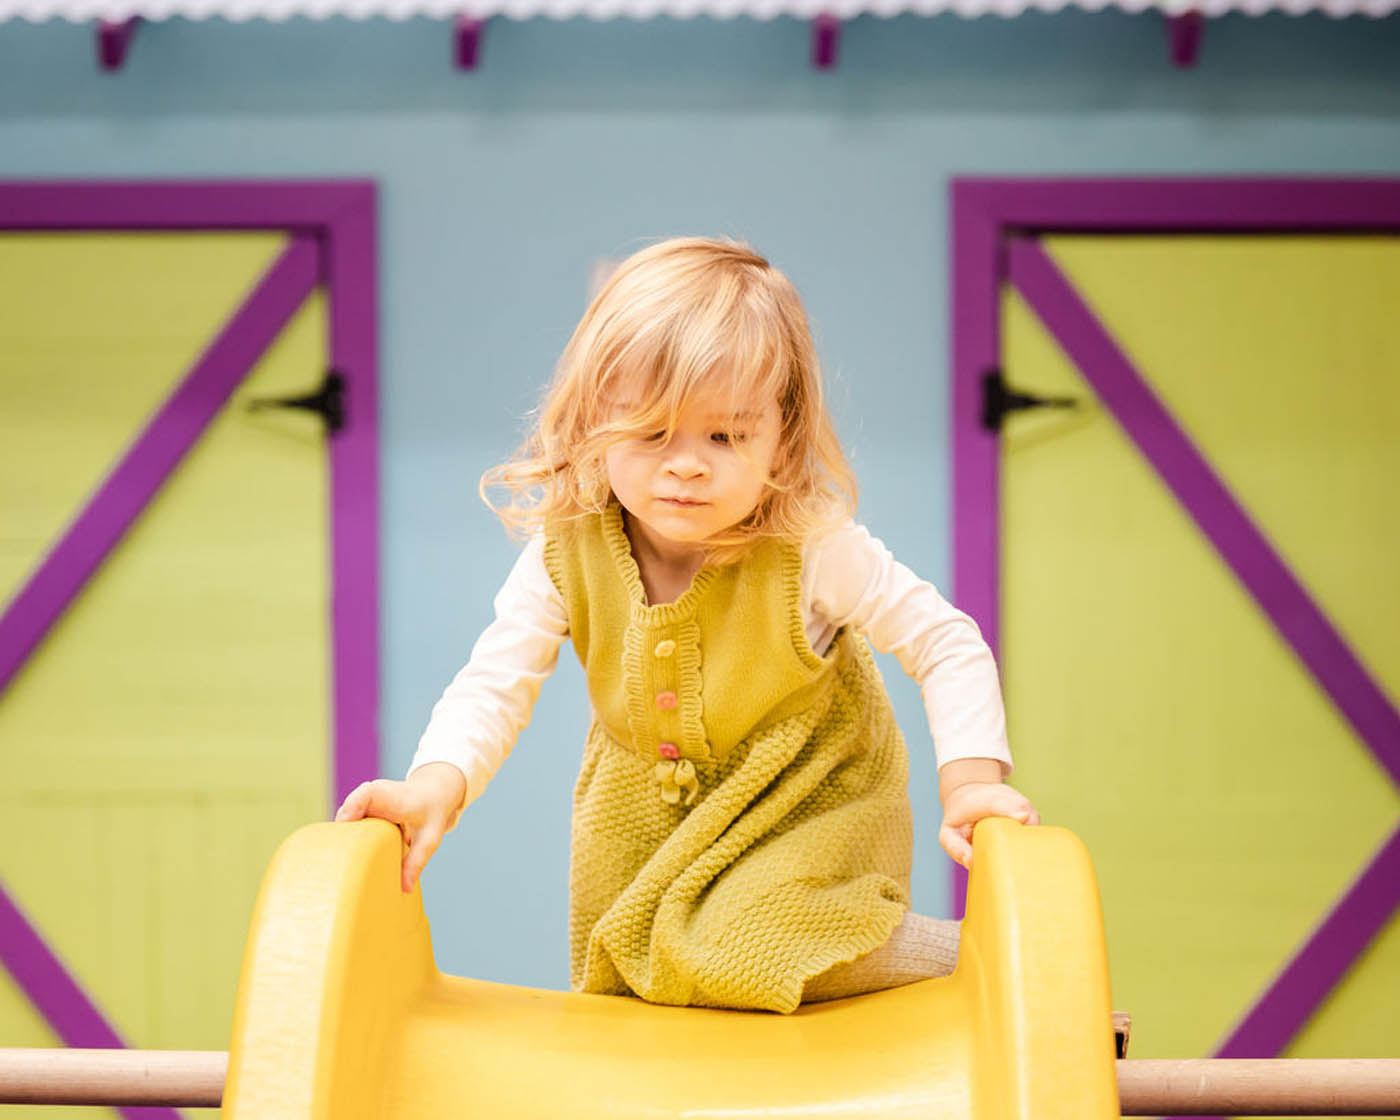 A toddler playing on a yellow slide at Romp n' Roll Willow Grove's classes for 3 year olds in Willow Grove, PA